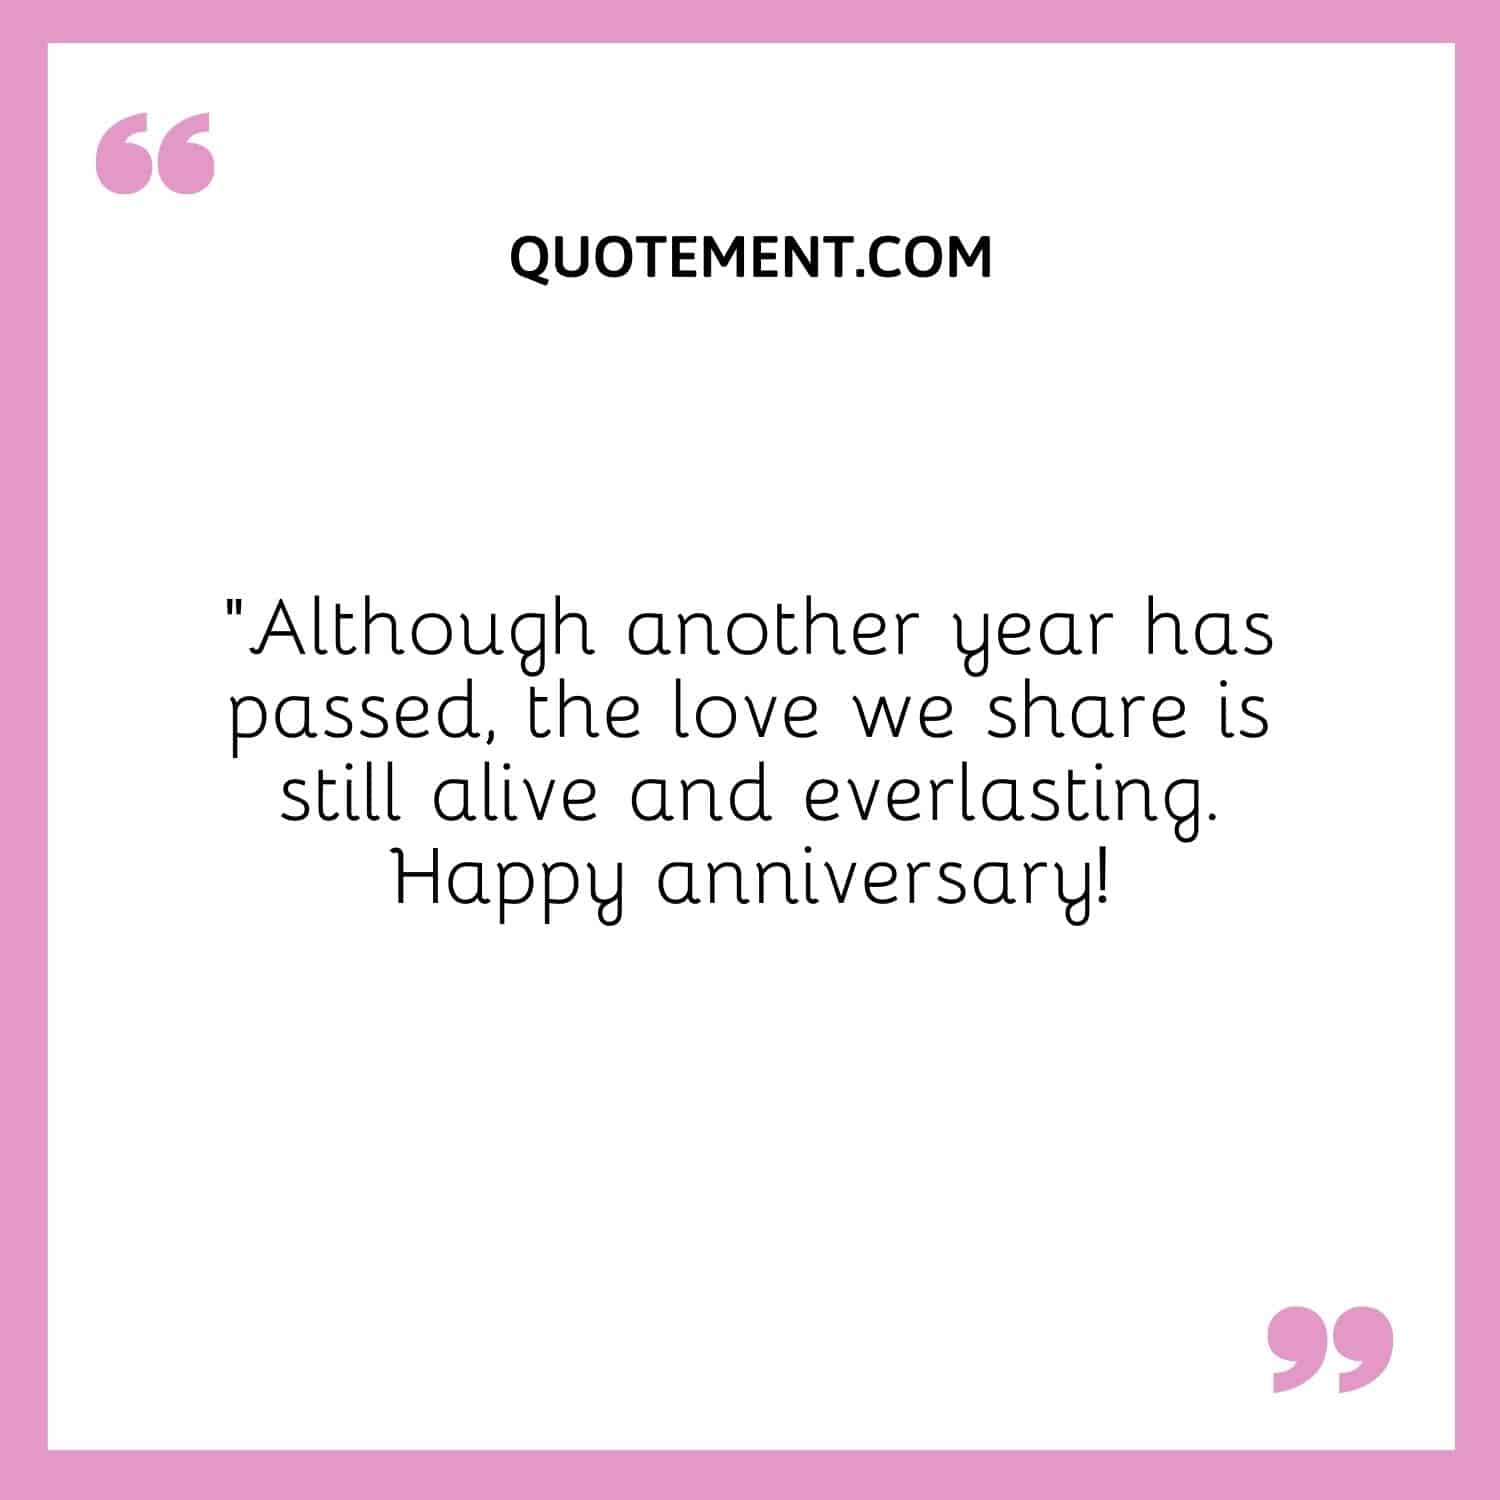 “Although another year has passed, the love we share is still alive and everlasting. Happy anniversary!